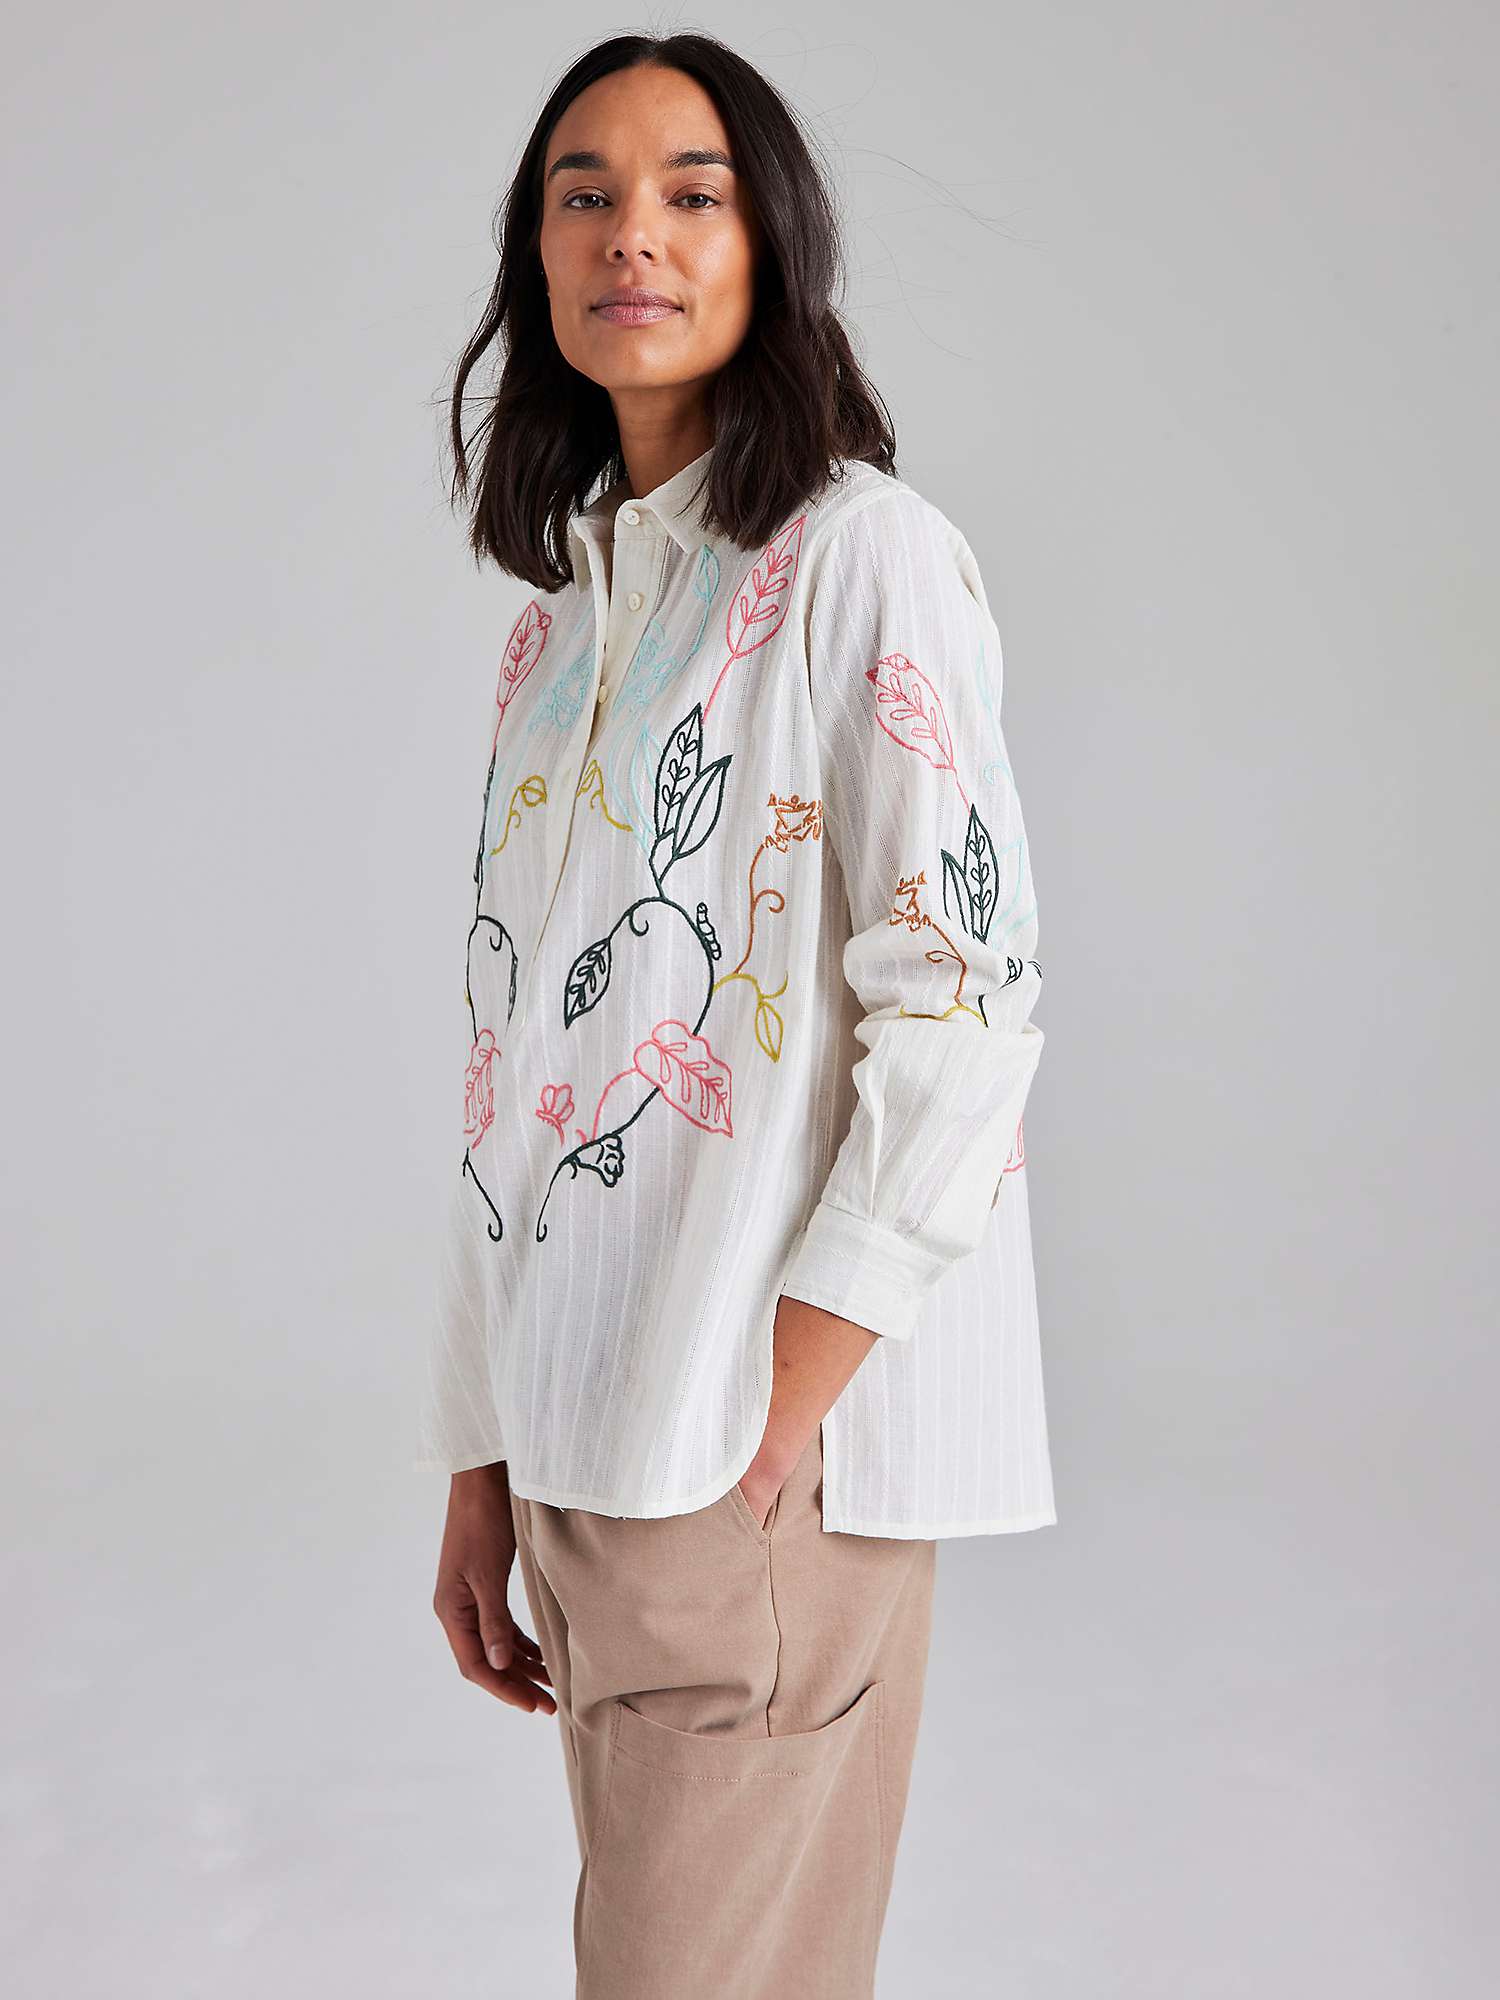 Buy Cape Cove Botanical Embroidered Dobby Stripe Shirt, Dubarry/Chalk Online at johnlewis.com